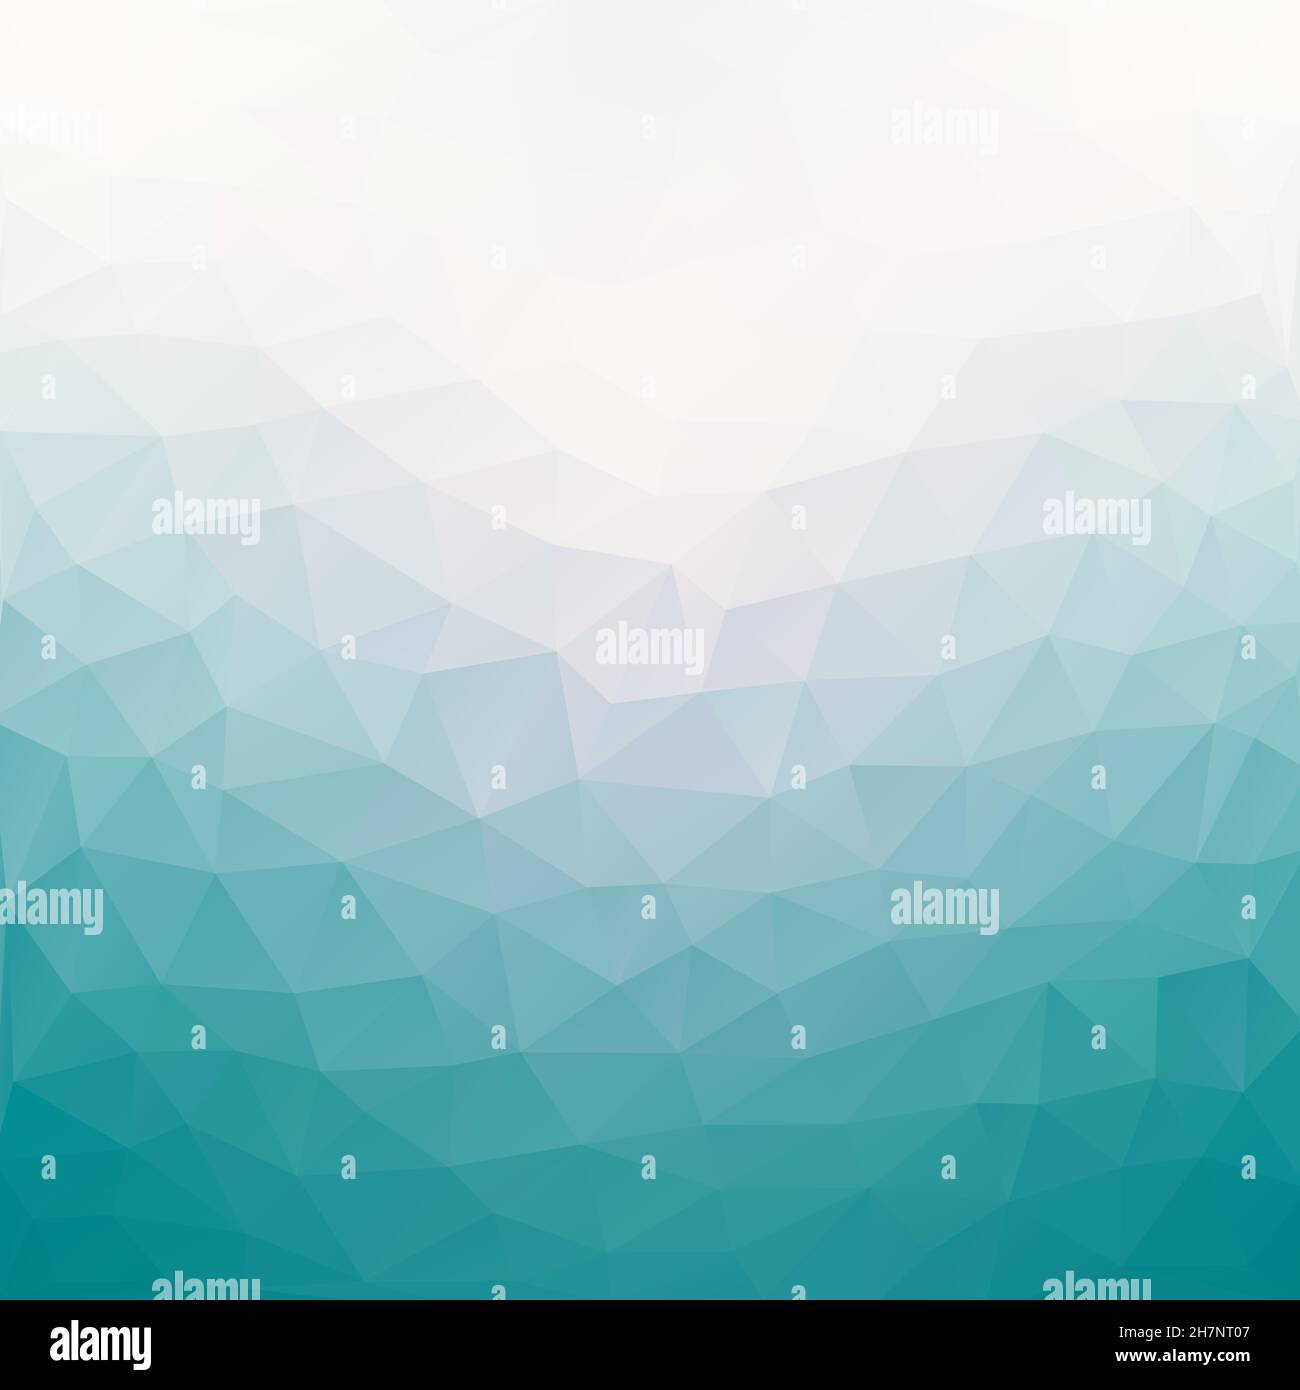 Geometric turquoise color texture background Stock Vector